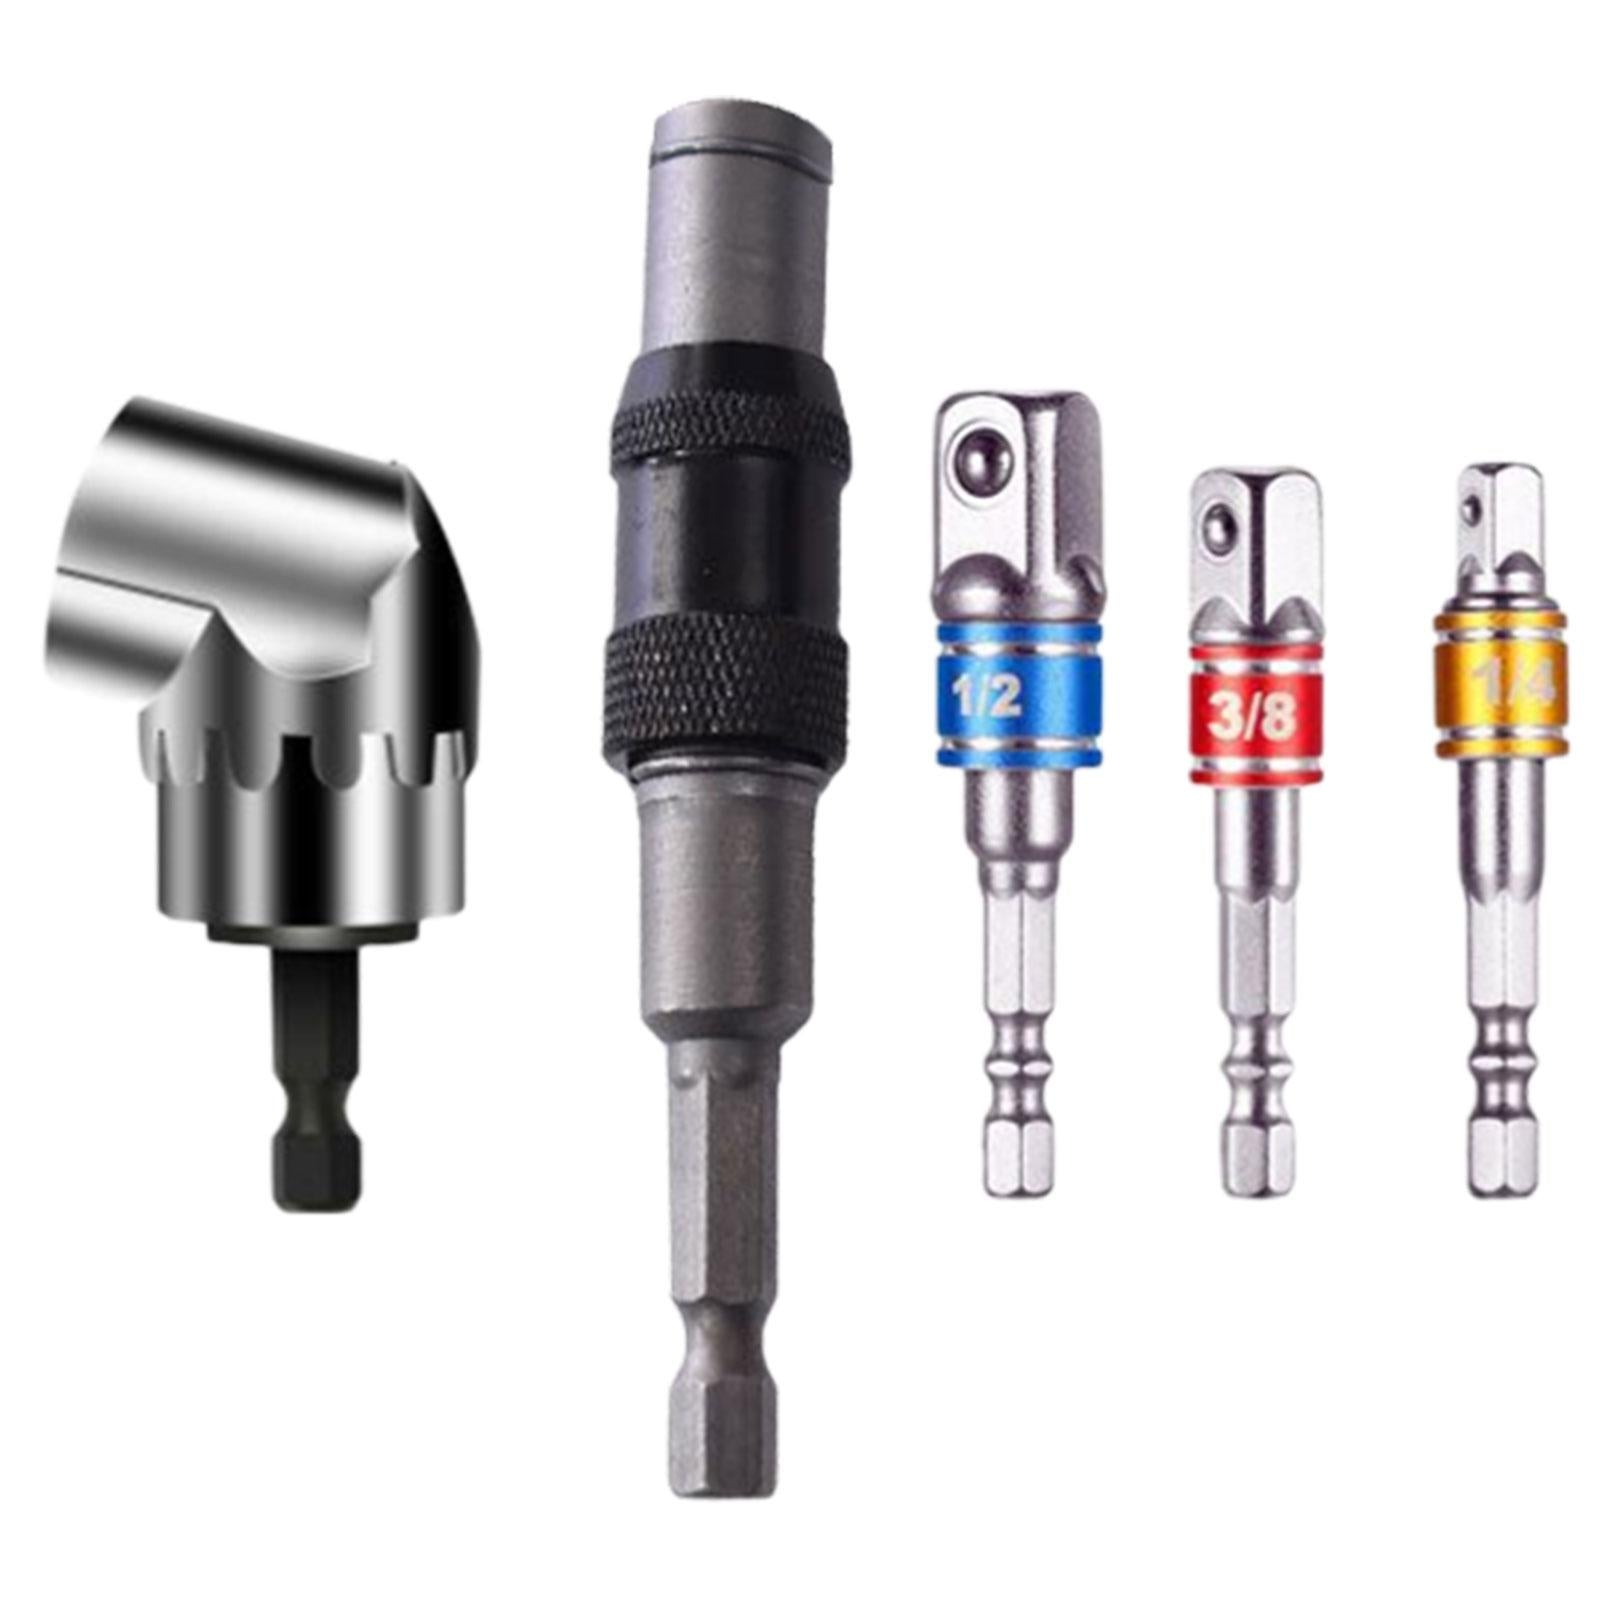 5Pcs Flexible Hex Shank Magnetic Screw Drill Tip for Impact Drivers